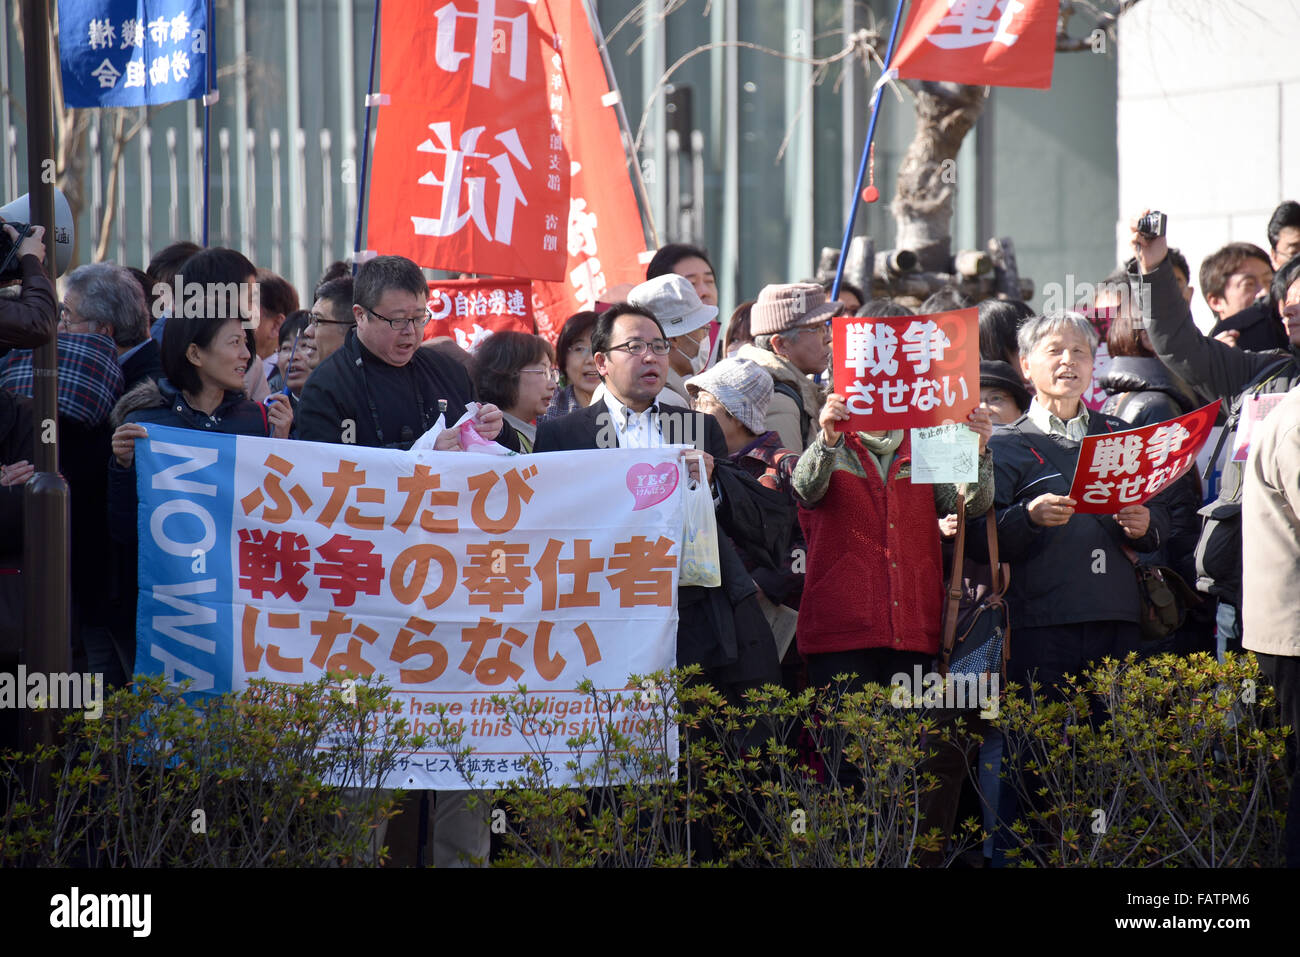 Tokyo, Japan. 4th Jan, 2016. A group of pacifists stages an anti-war rally outside the Diet in Tokyo on Monday, January 4, 2016. The Diet opened an ordinary session earlier than usual, with political parties weighing on the July upper house election. © Natsuki Sakai/AFLO/Alamy Live News Stock Photo